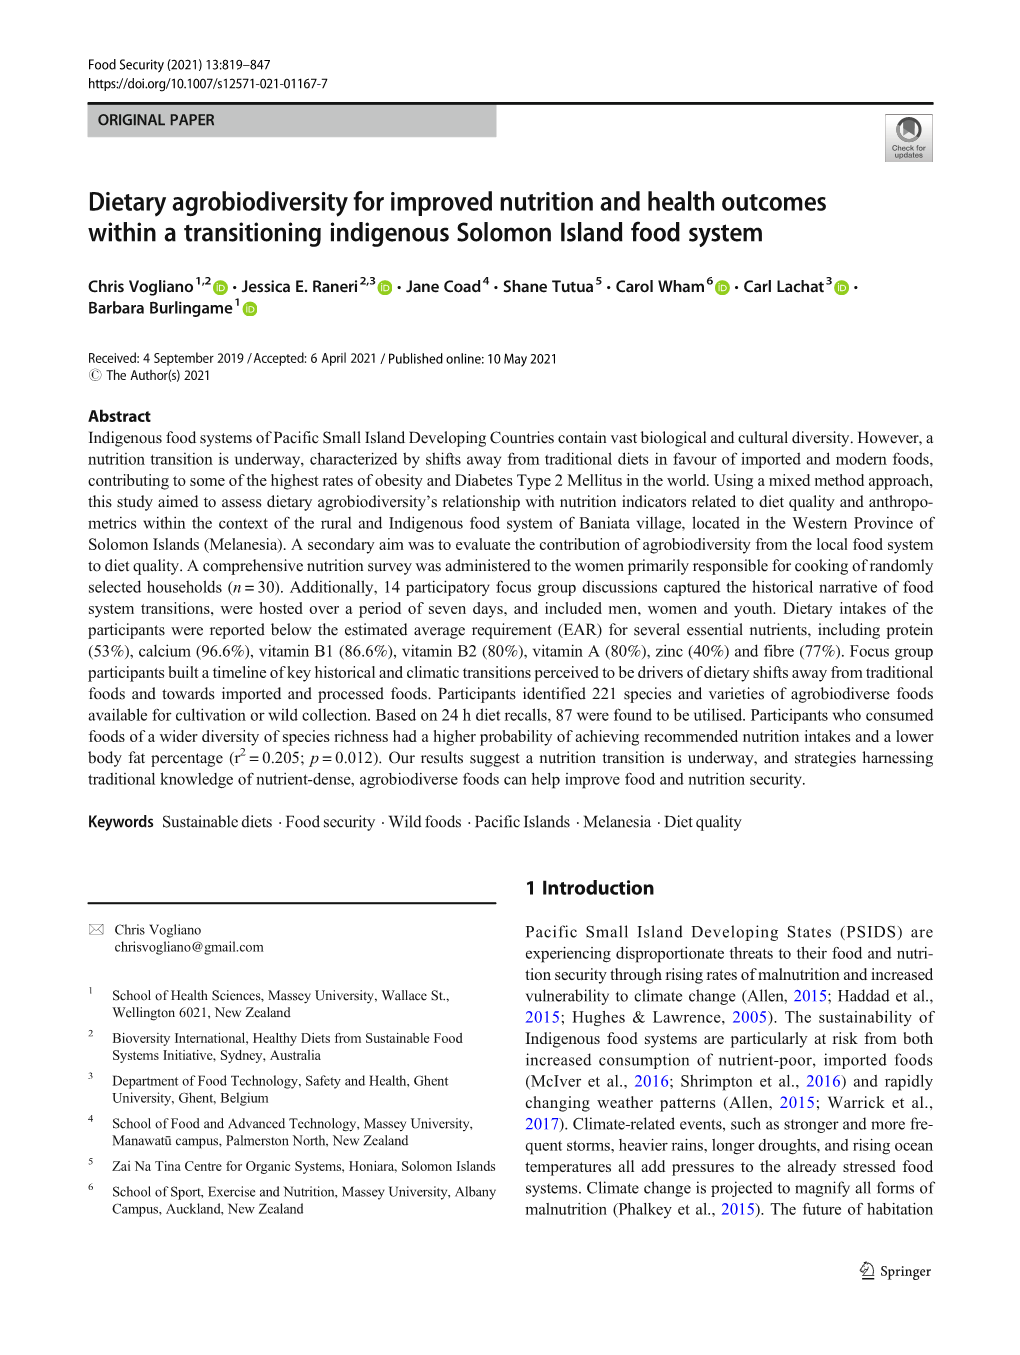 Dietary Agrobiodiversity for Improved Nutrition and Health Outcomes Within a Transitioning Indigenous Solomon Island Food System